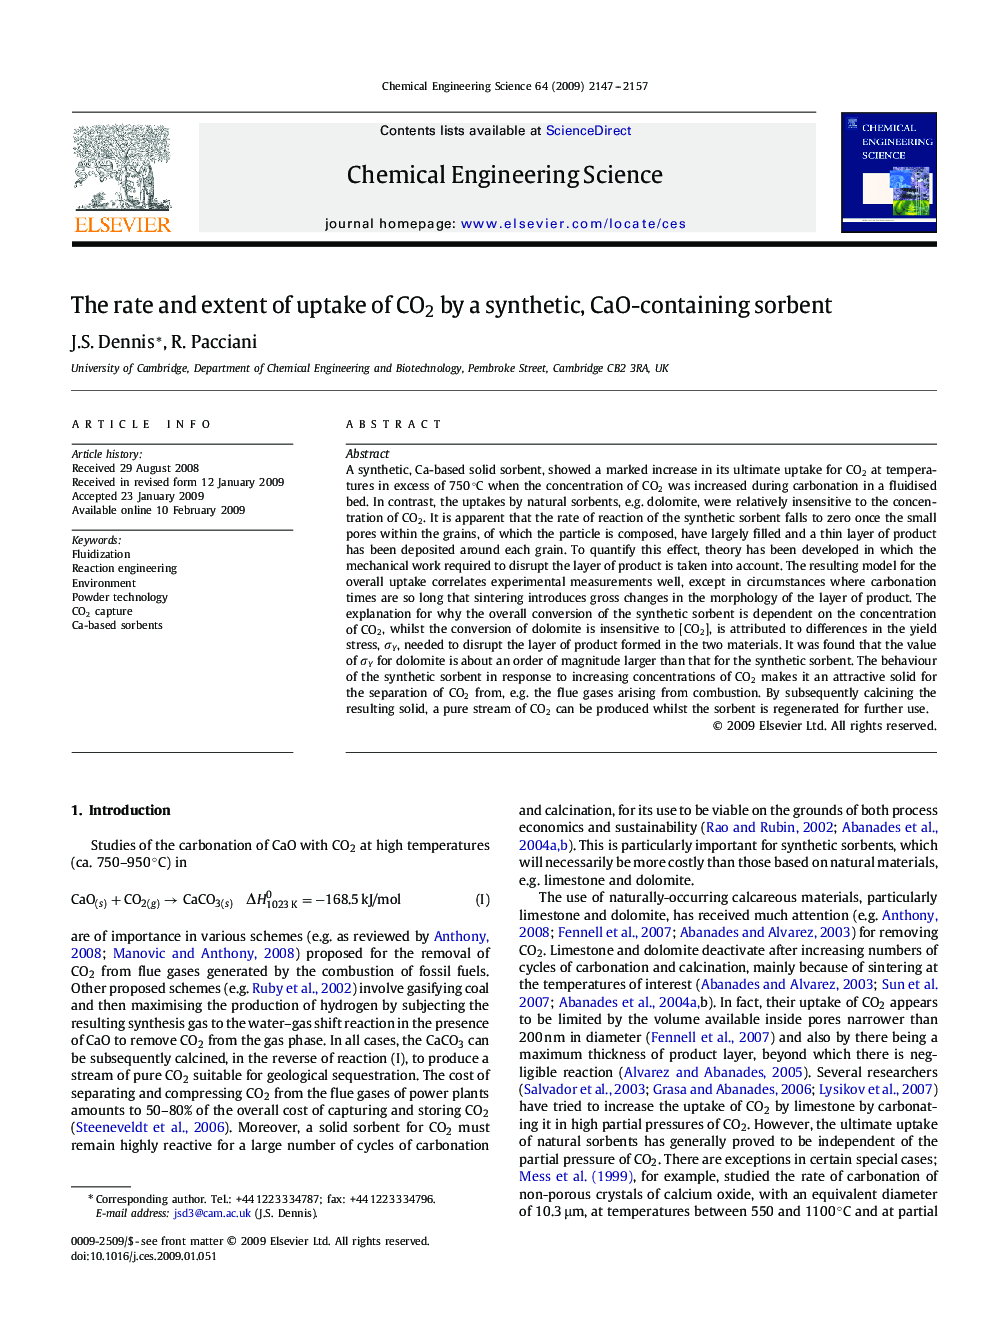 The rate and extent of uptake of CO2 by a synthetic, CaO-containing sorbent